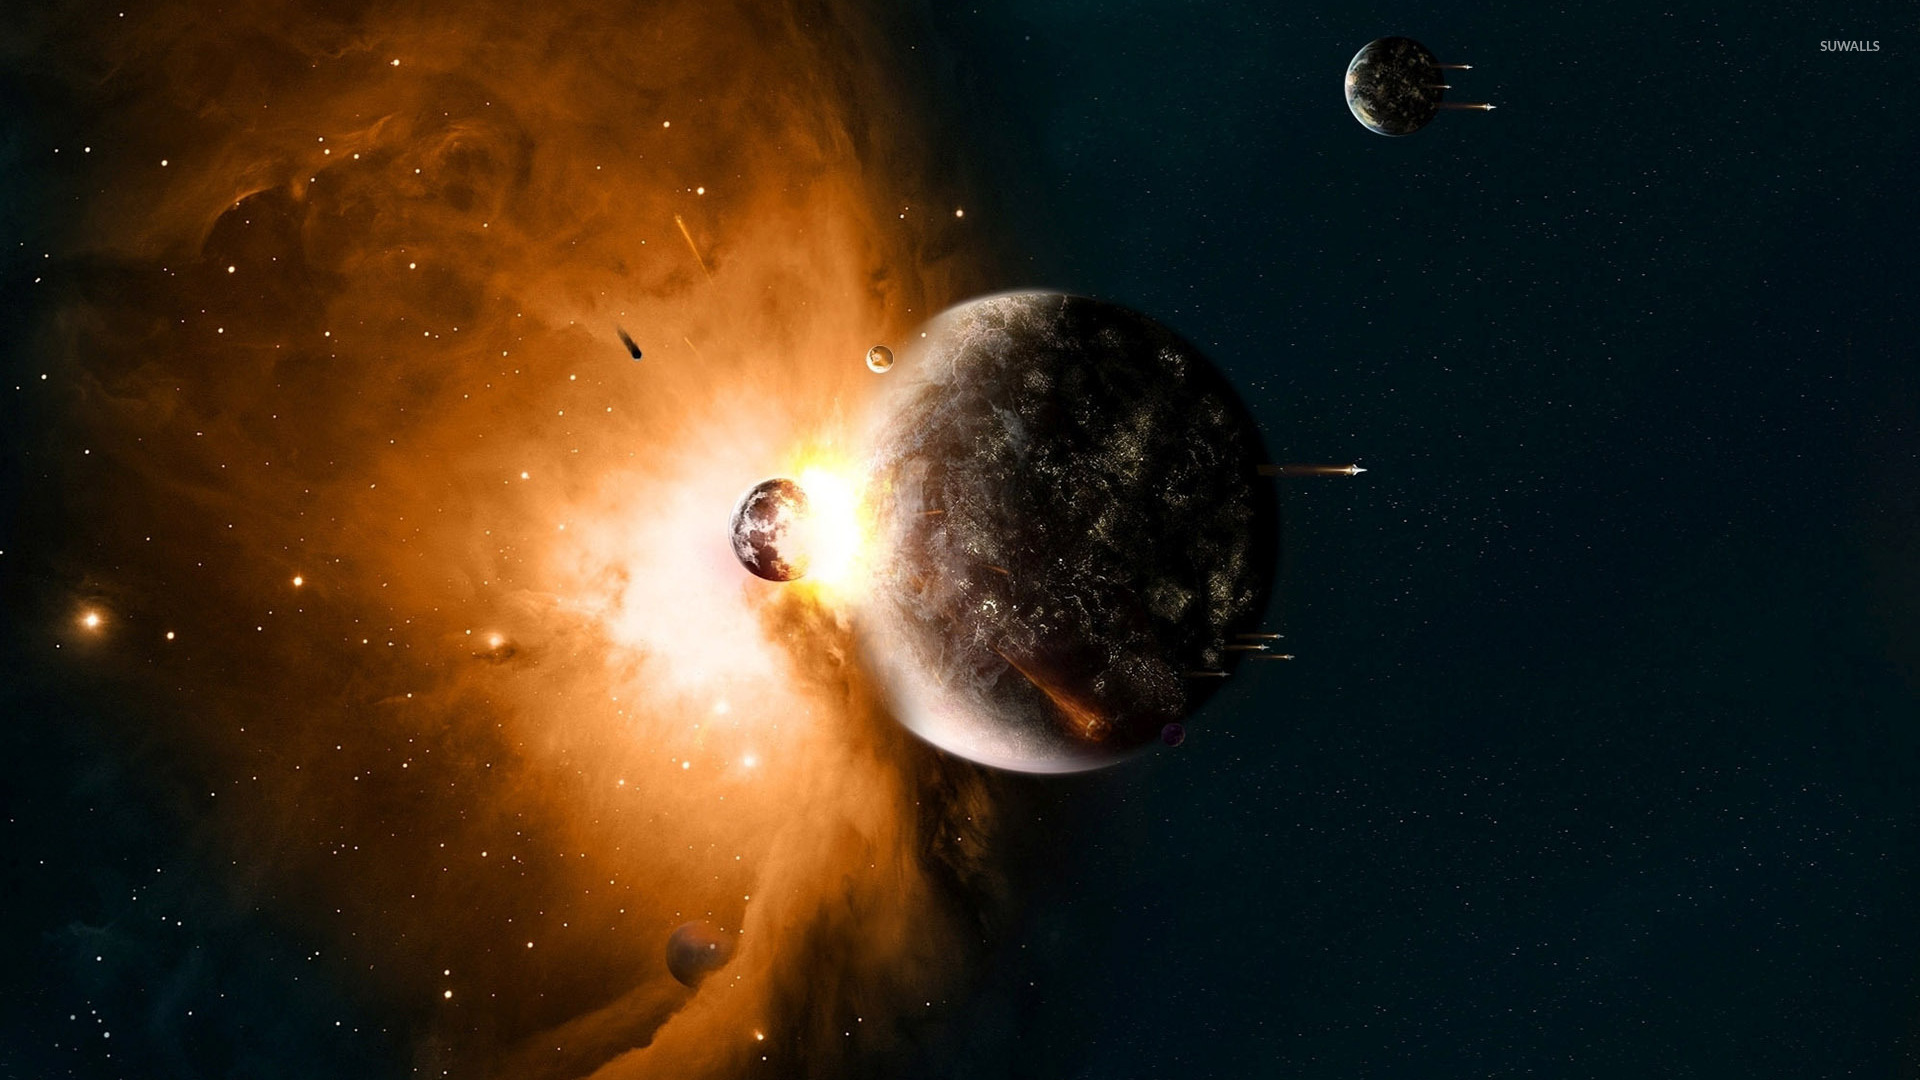 Planets collide wallpaper - Space wallpapers - #34195